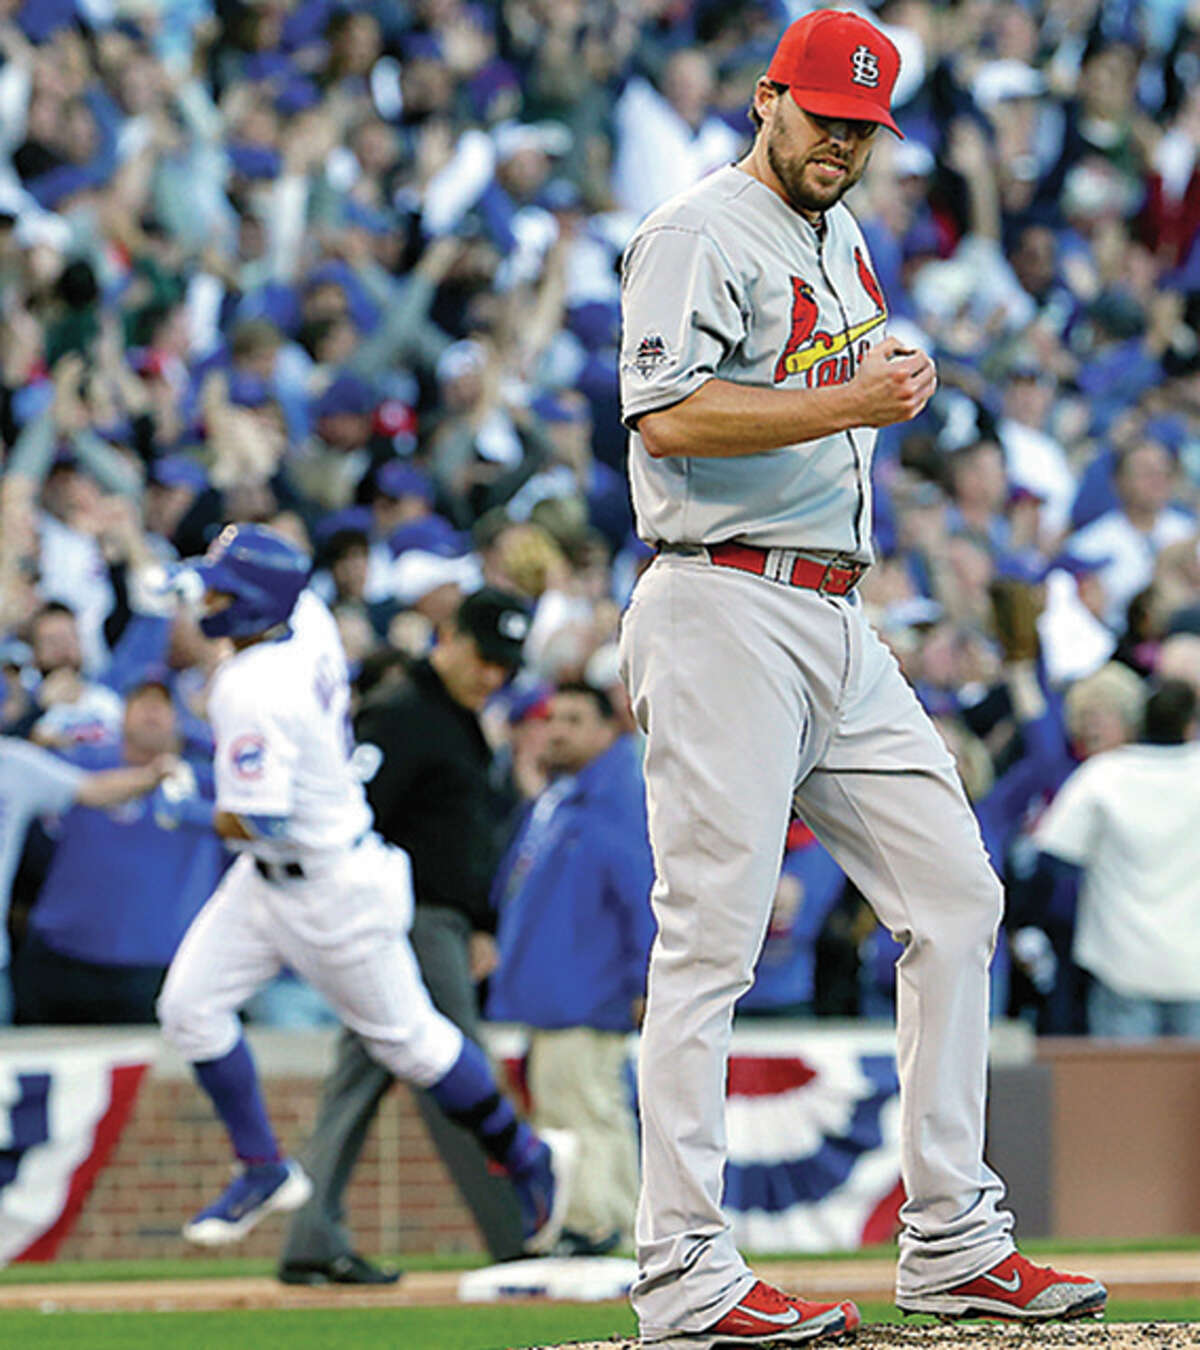 Cardinals starter John Lackey reacts after giving up a three-run home run to the Cubs’ Javier Baez in the second inning Tuesday at Wrigley Field.